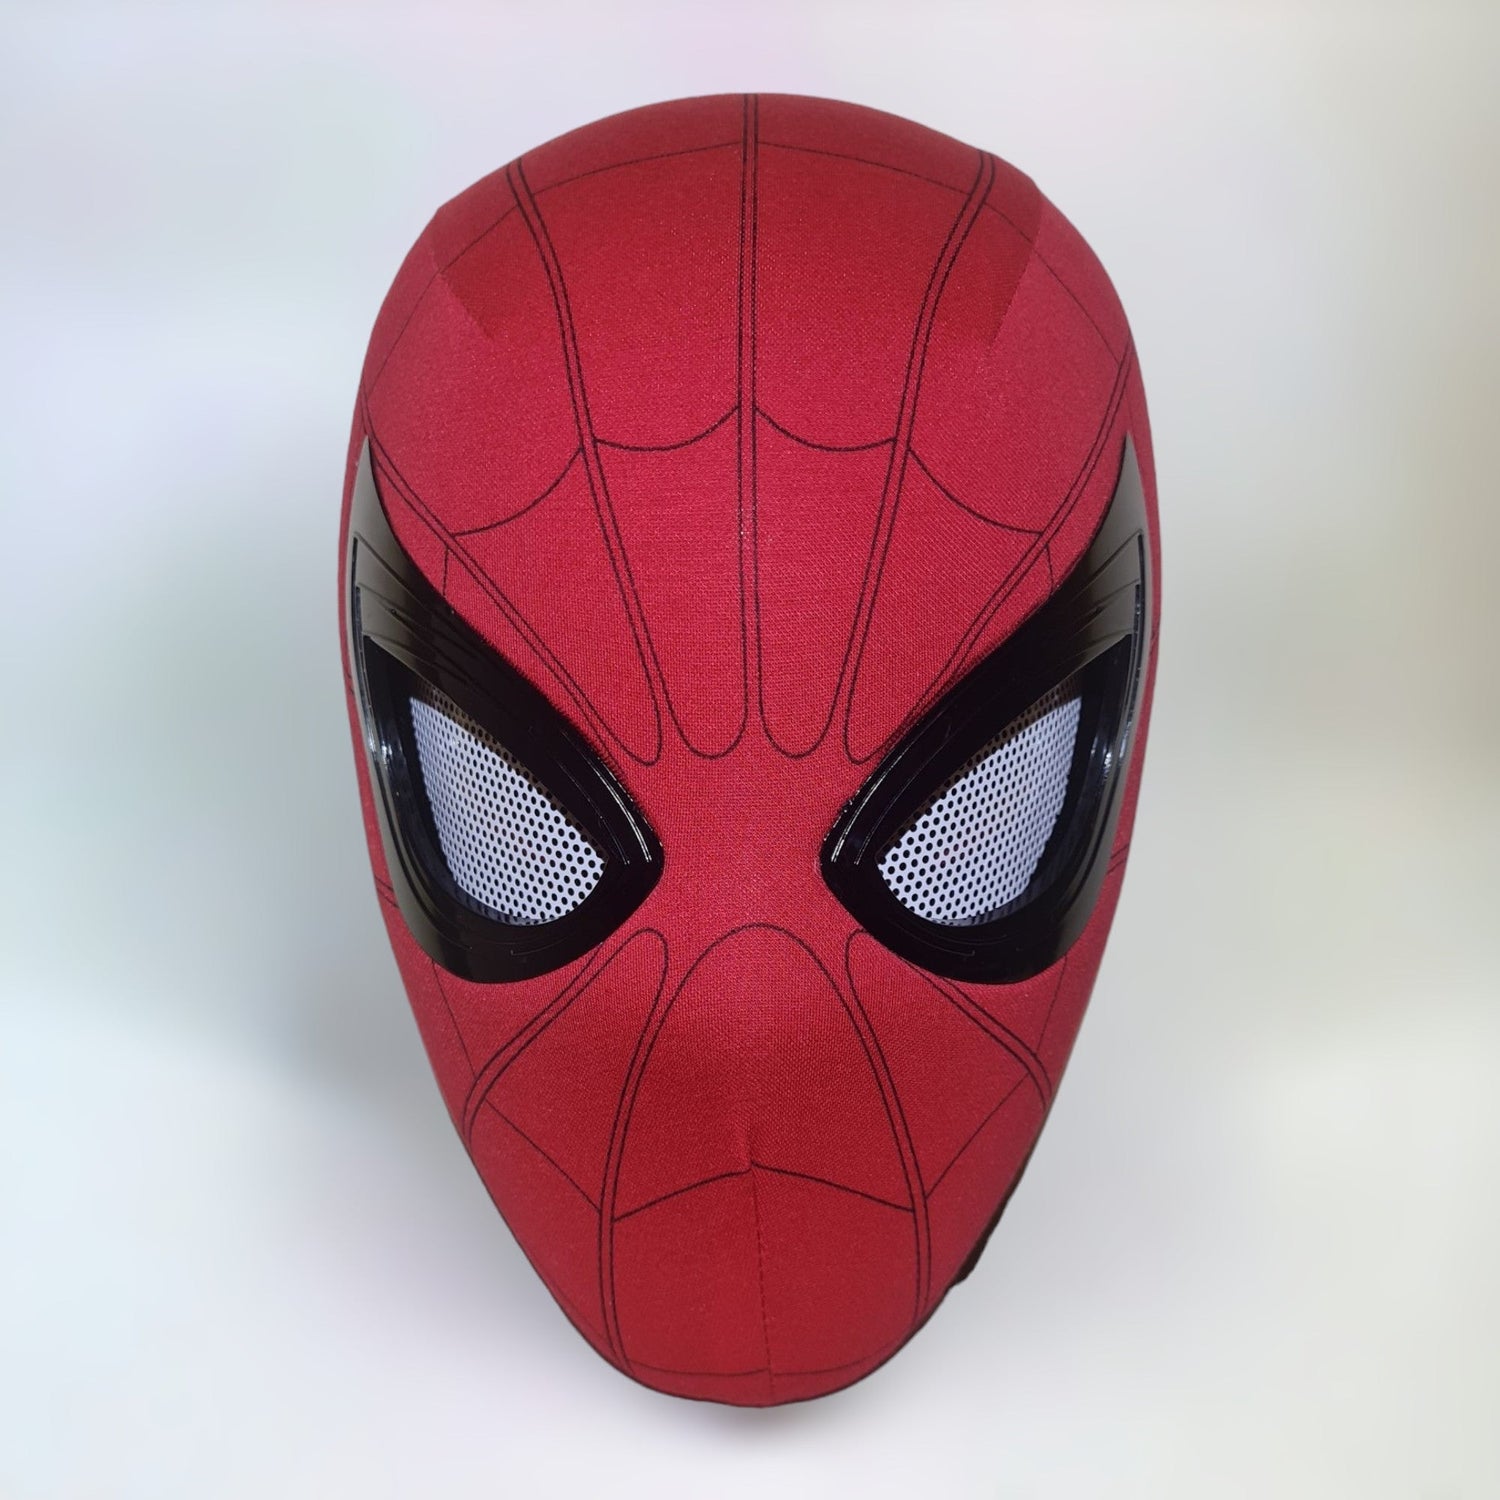 Spiderman mask with blinking movable eyes on a plain white background, part of the Spiderman Masks Blinking Eyes Series collectibles